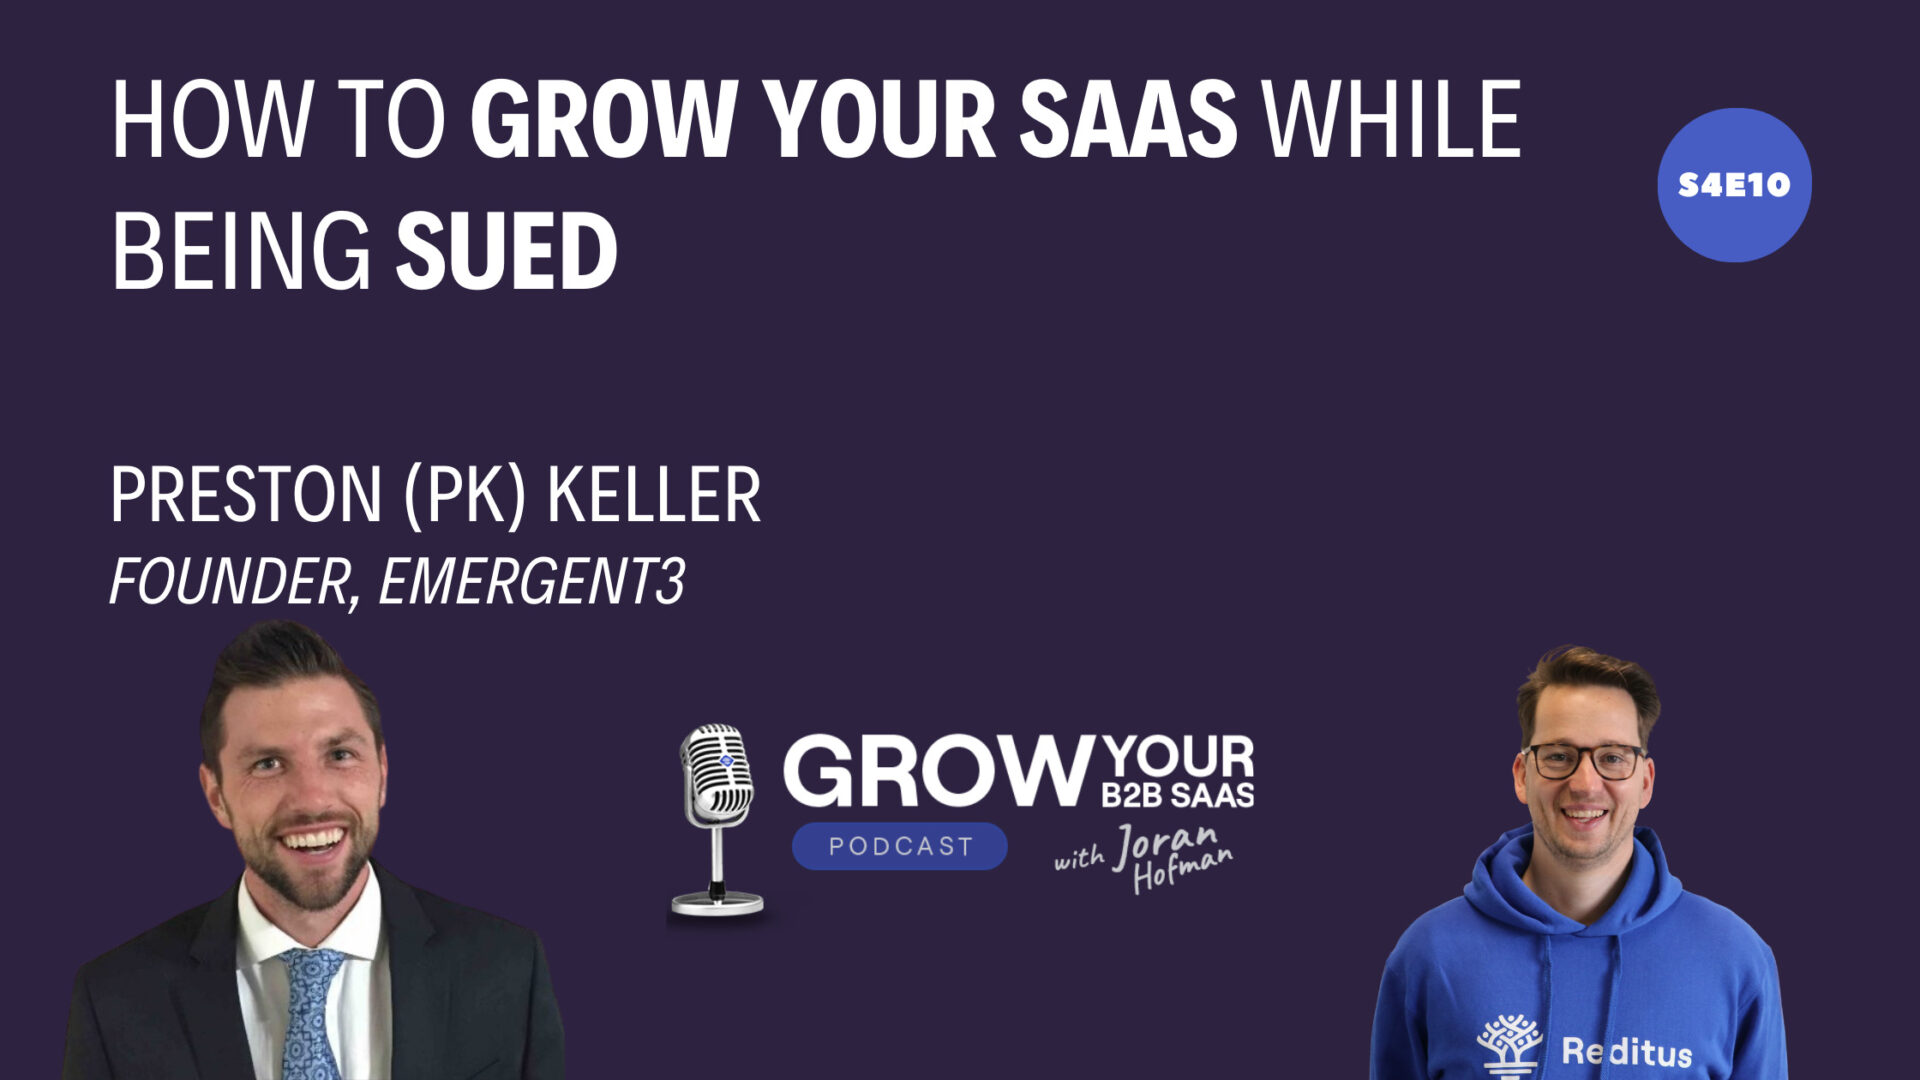 https://www.getreditus.com/podcast/s4e10-how-to-grow-your-saas-while-being-sued-with-preston-keller/